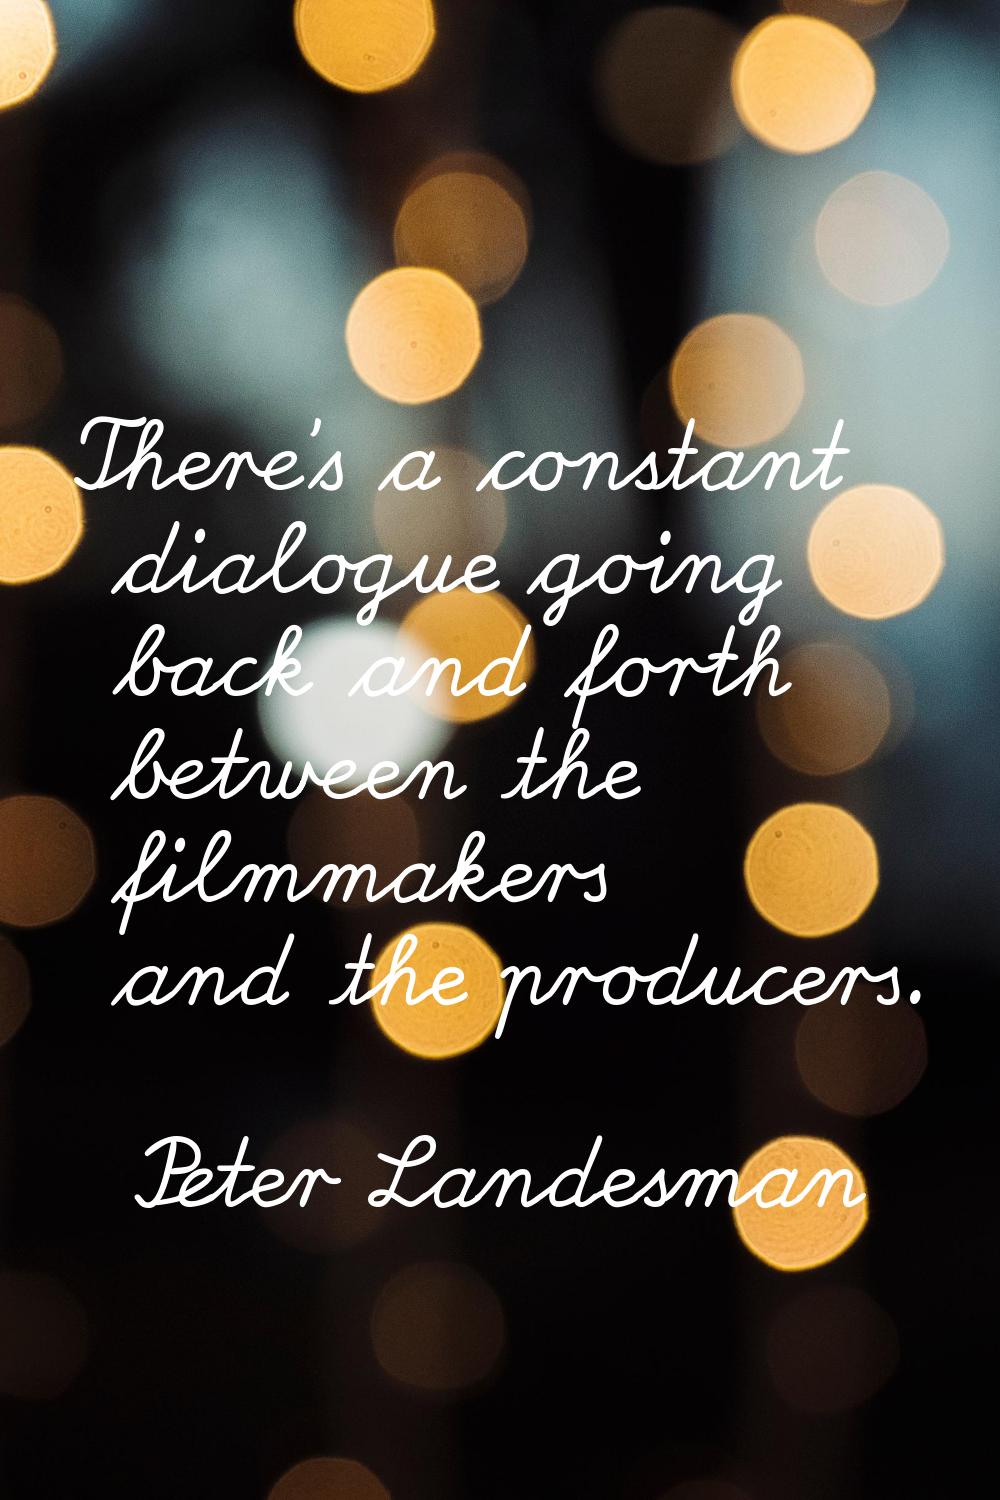 There's a constant dialogue going back and forth between the filmmakers and the producers.